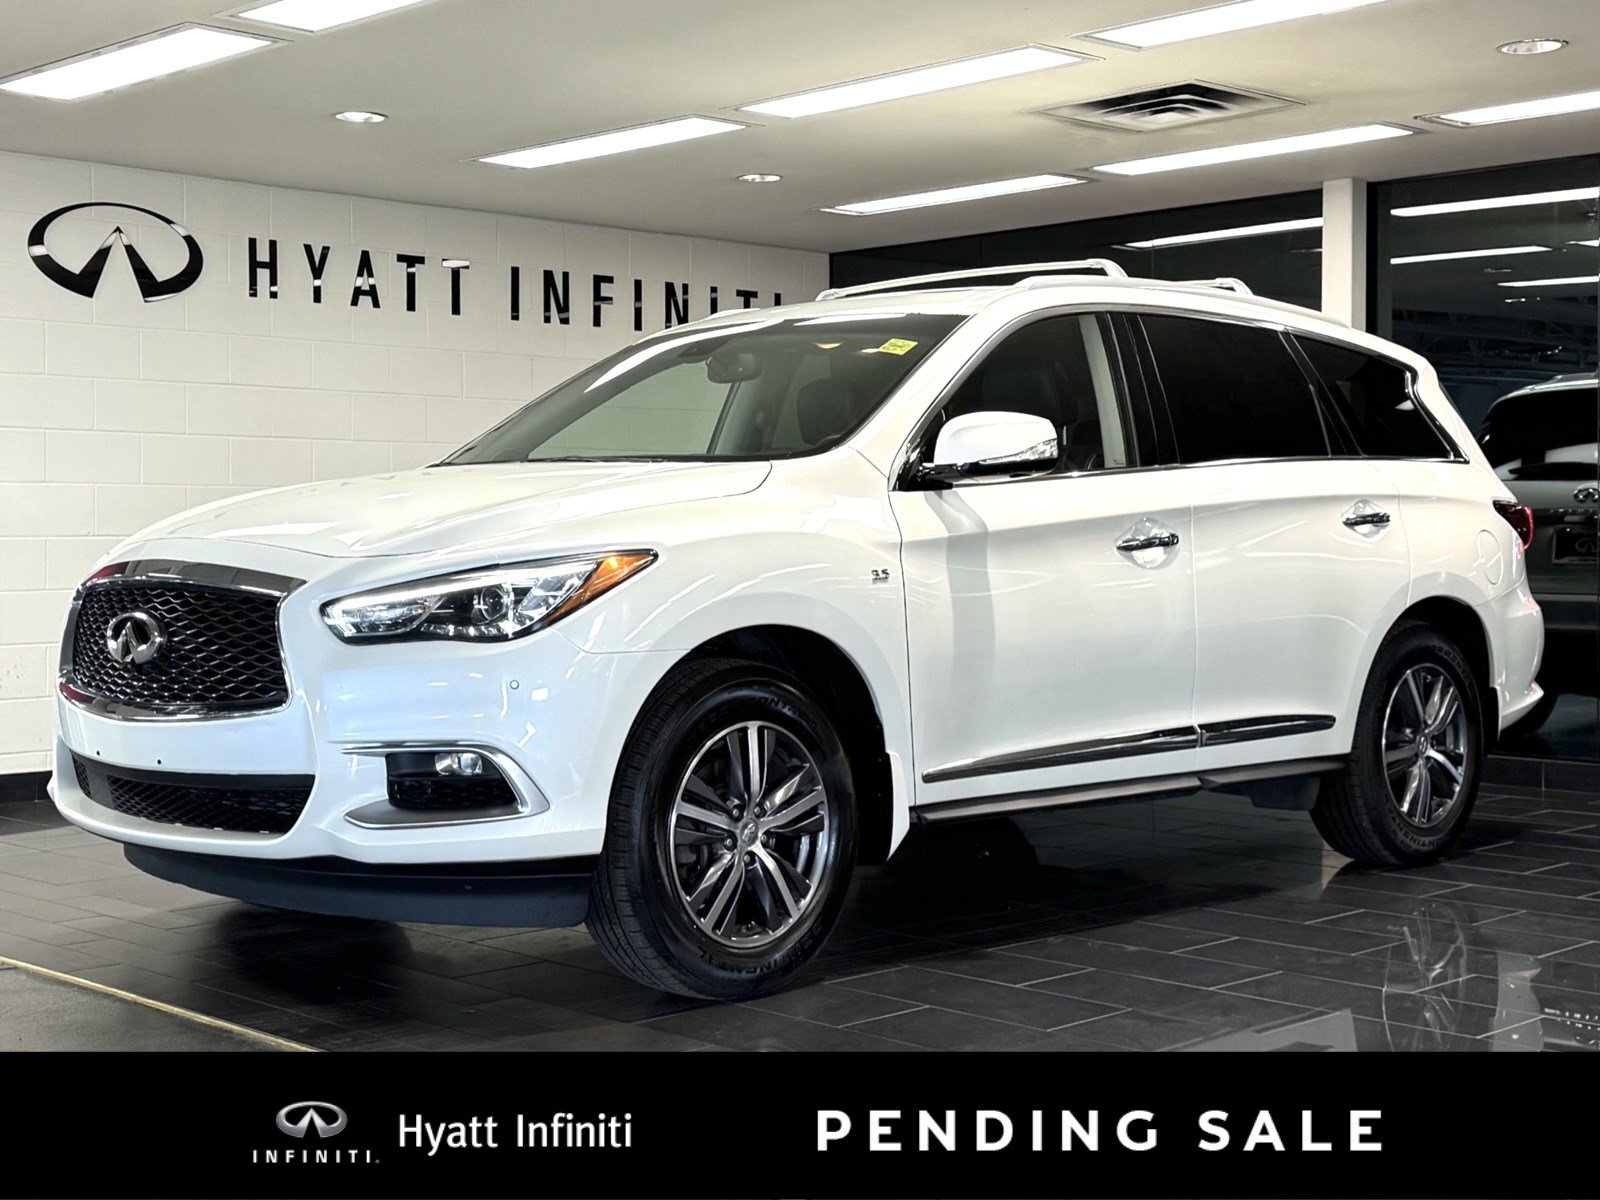 2016 Infiniti QX60 Premium - One Owner | No Accidents | 3rd Row Seat 